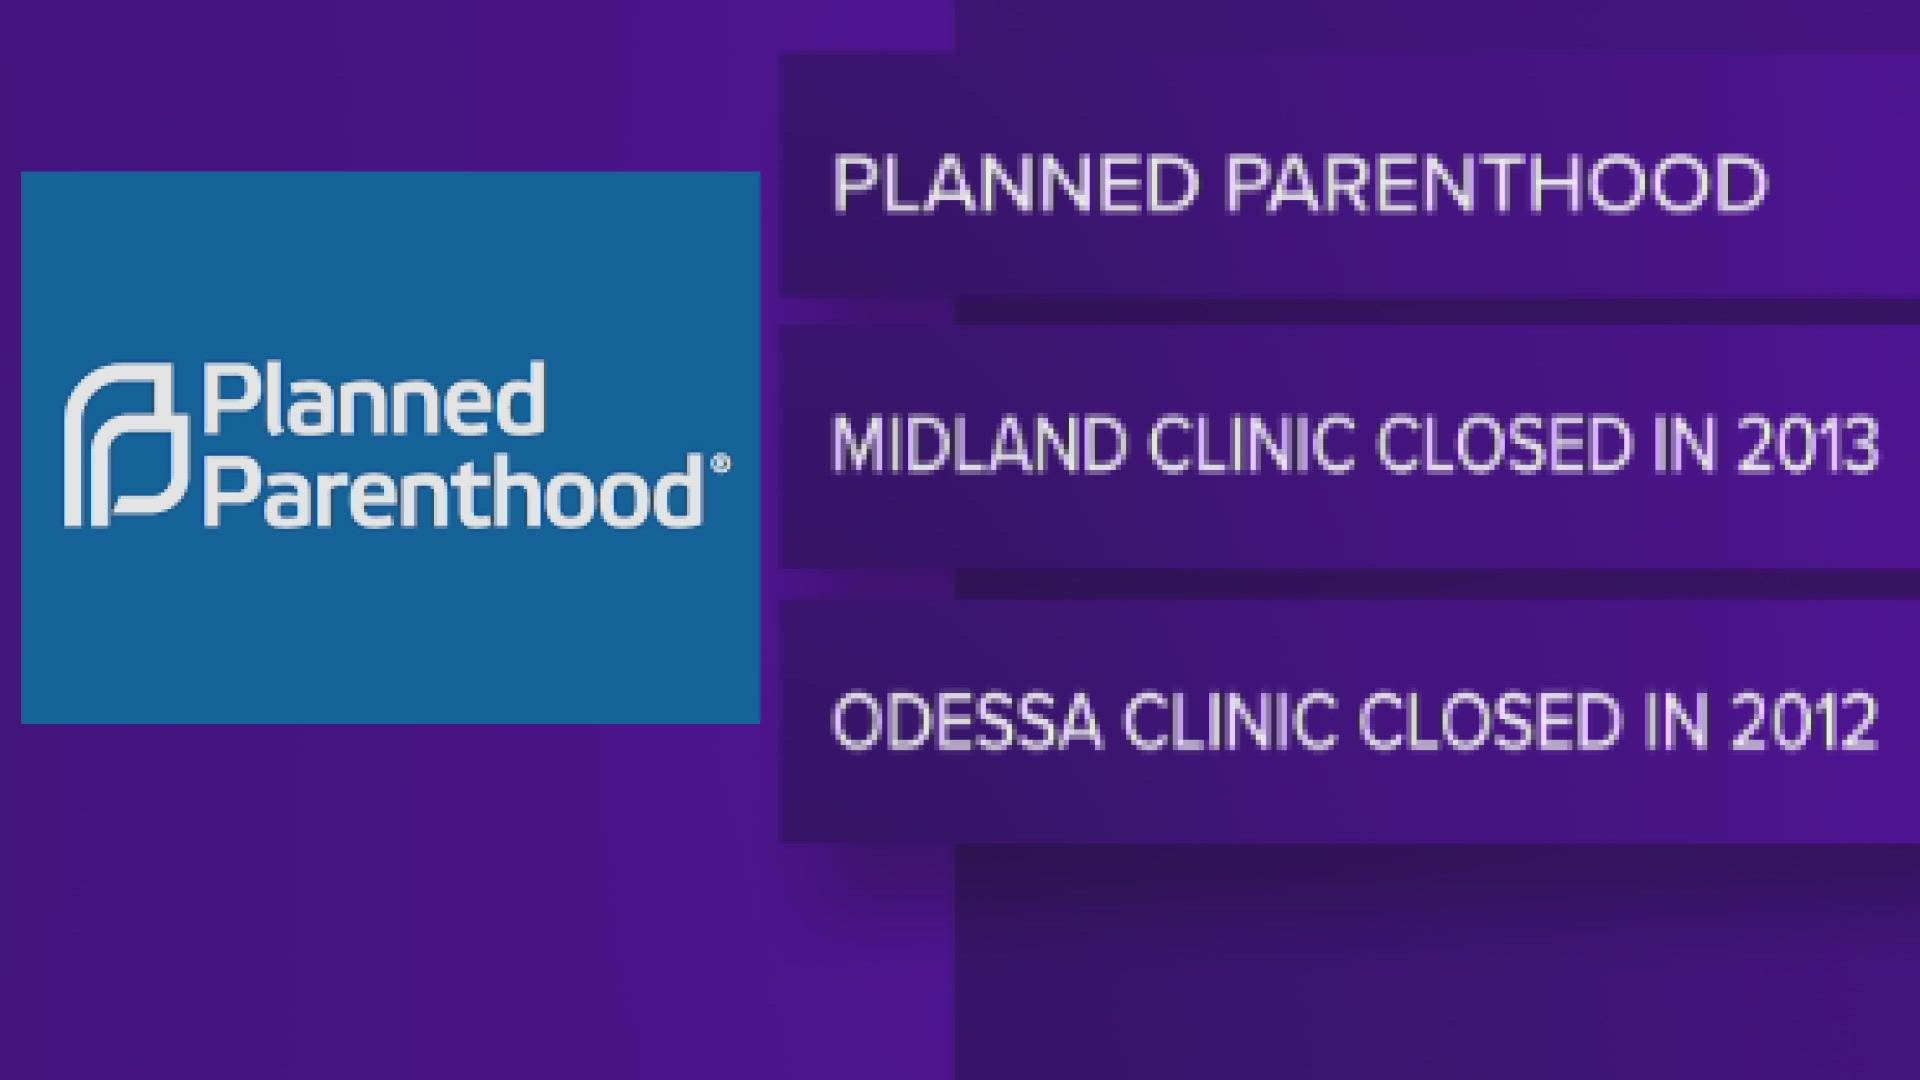 The last Planned Parenthood in our area shut down in 2013.